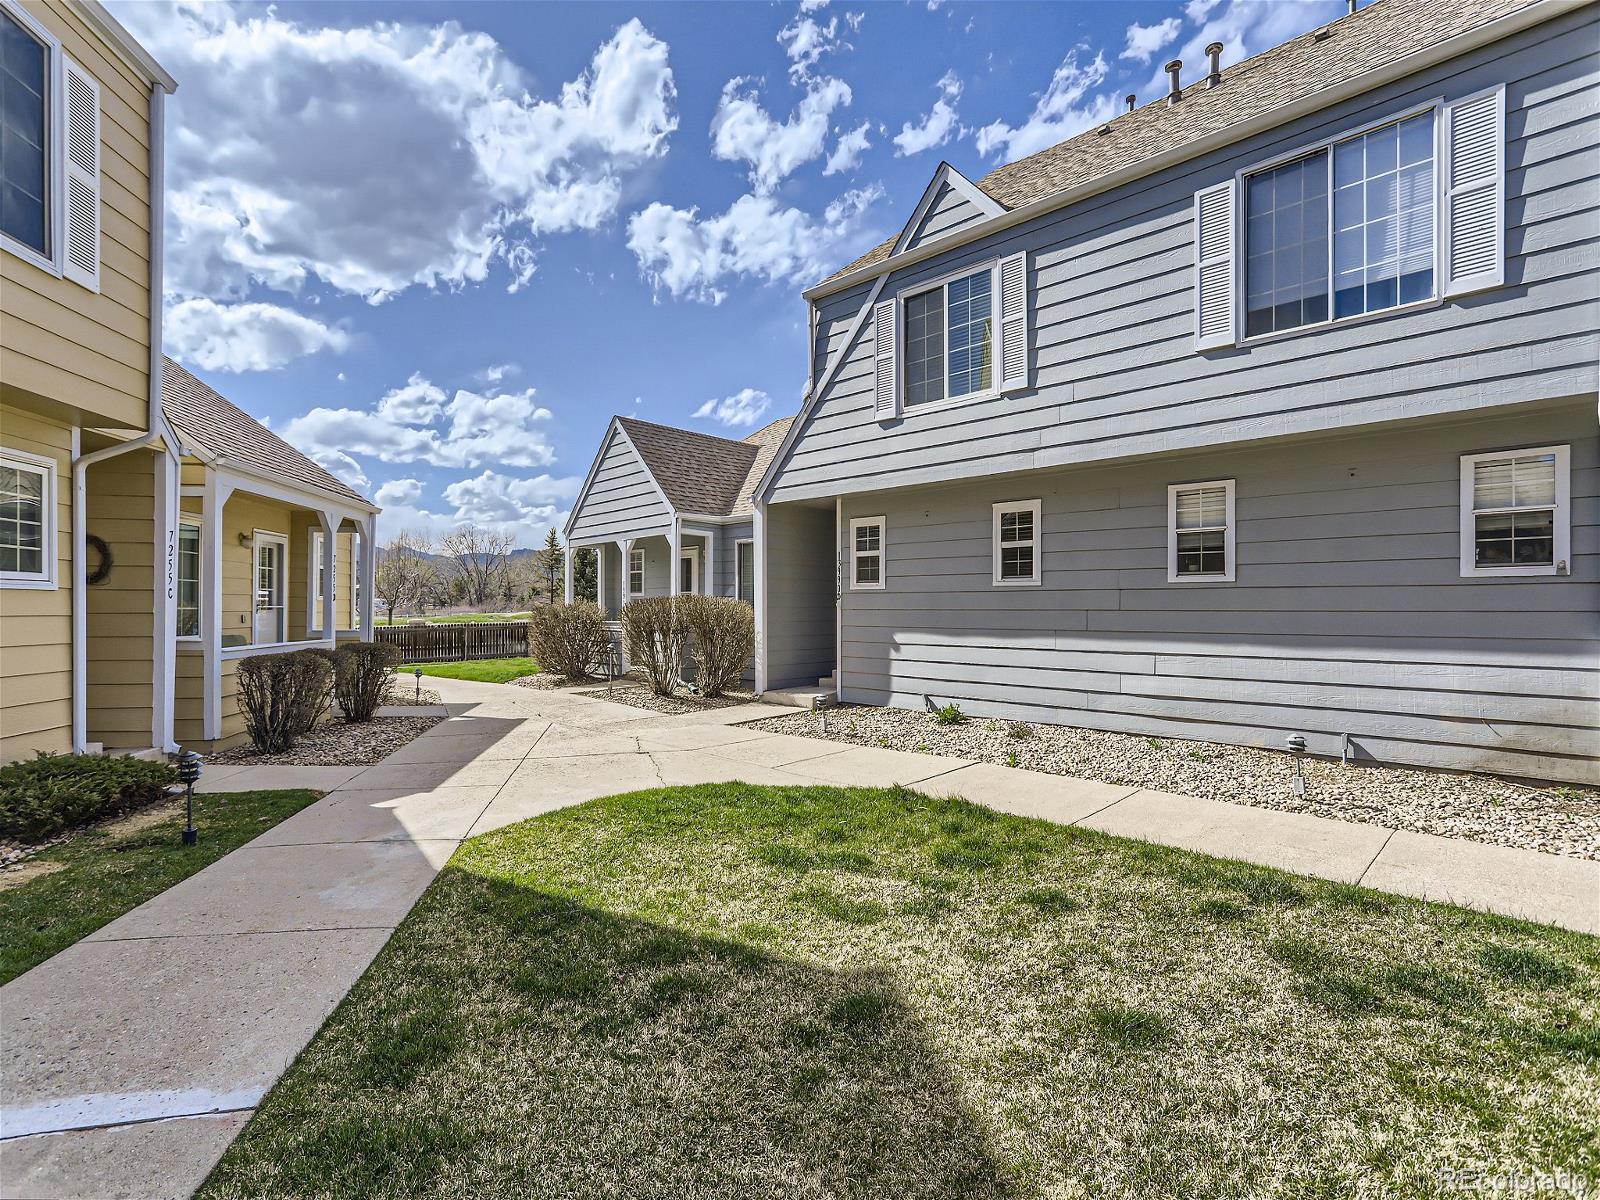 13990 W 72nd Place D, Arvada  MLS: 5591640 Beds: 2 Baths: 2 Price: $395,000